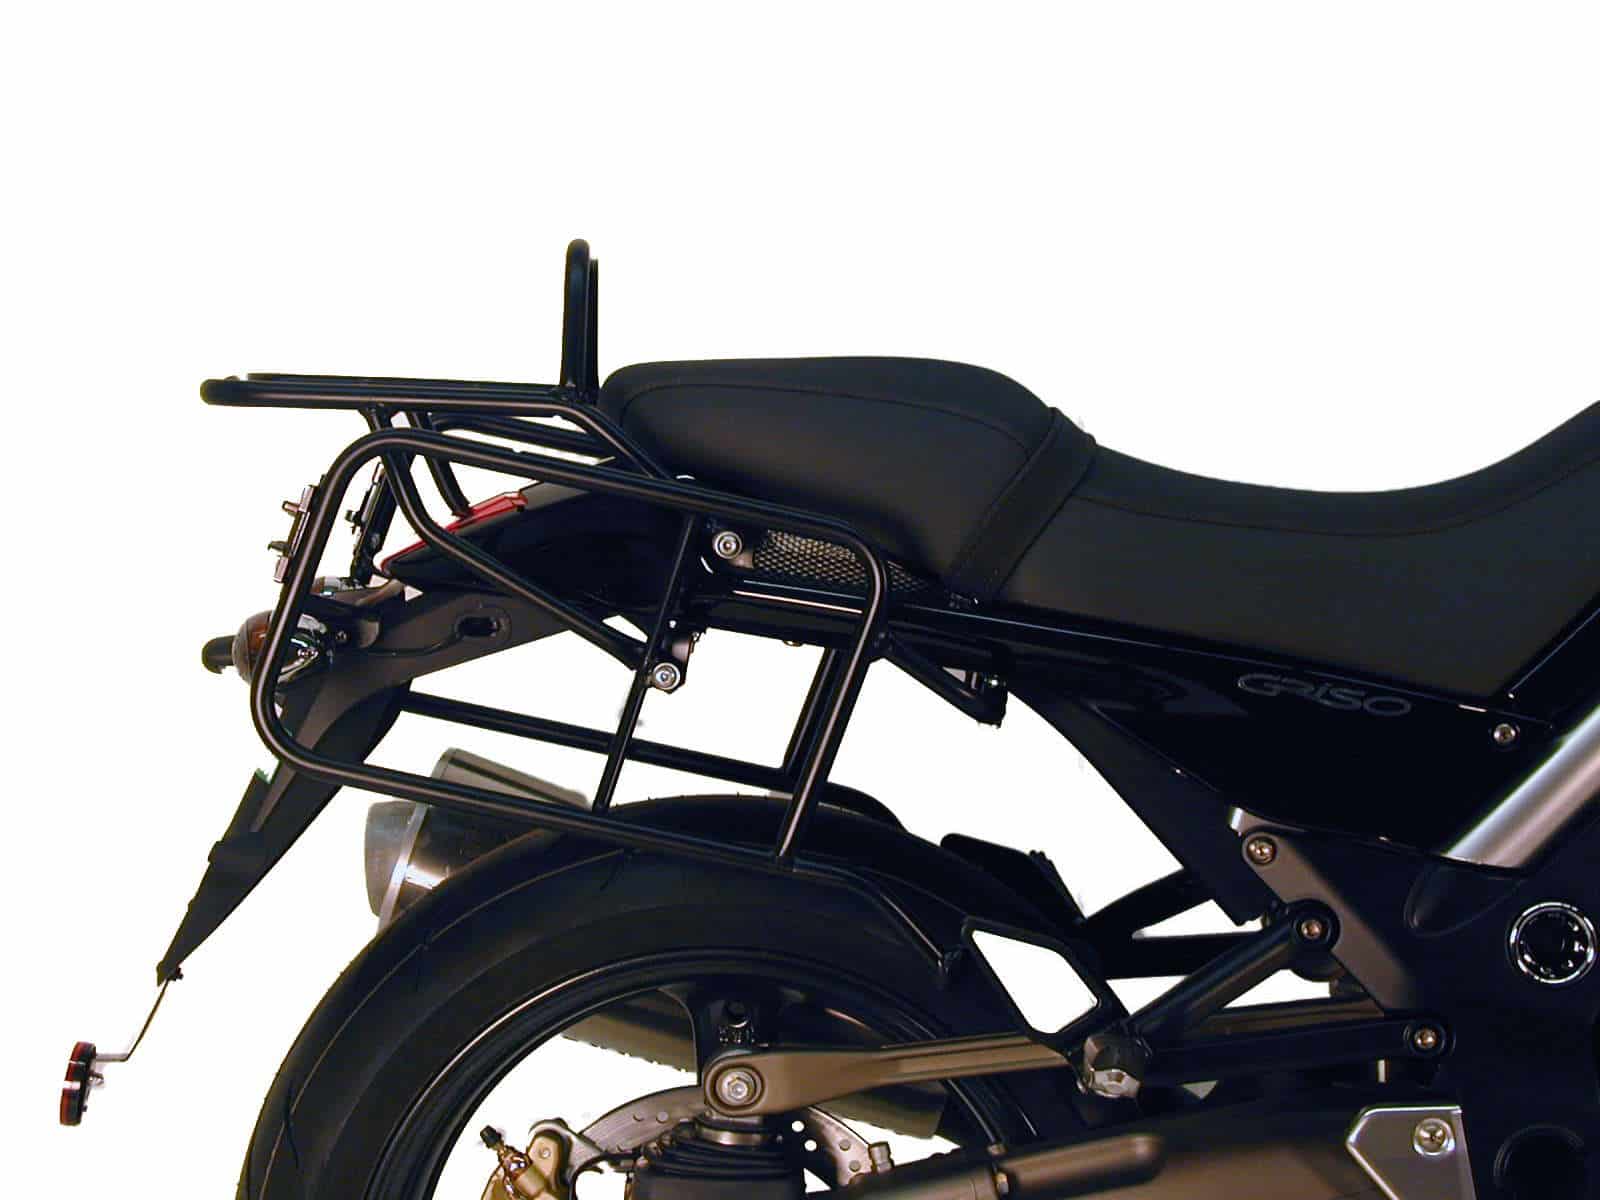 Sidecarrier permanent mounted black for Moto Guzzi Griso 850/1100/1200 (2005-2016)